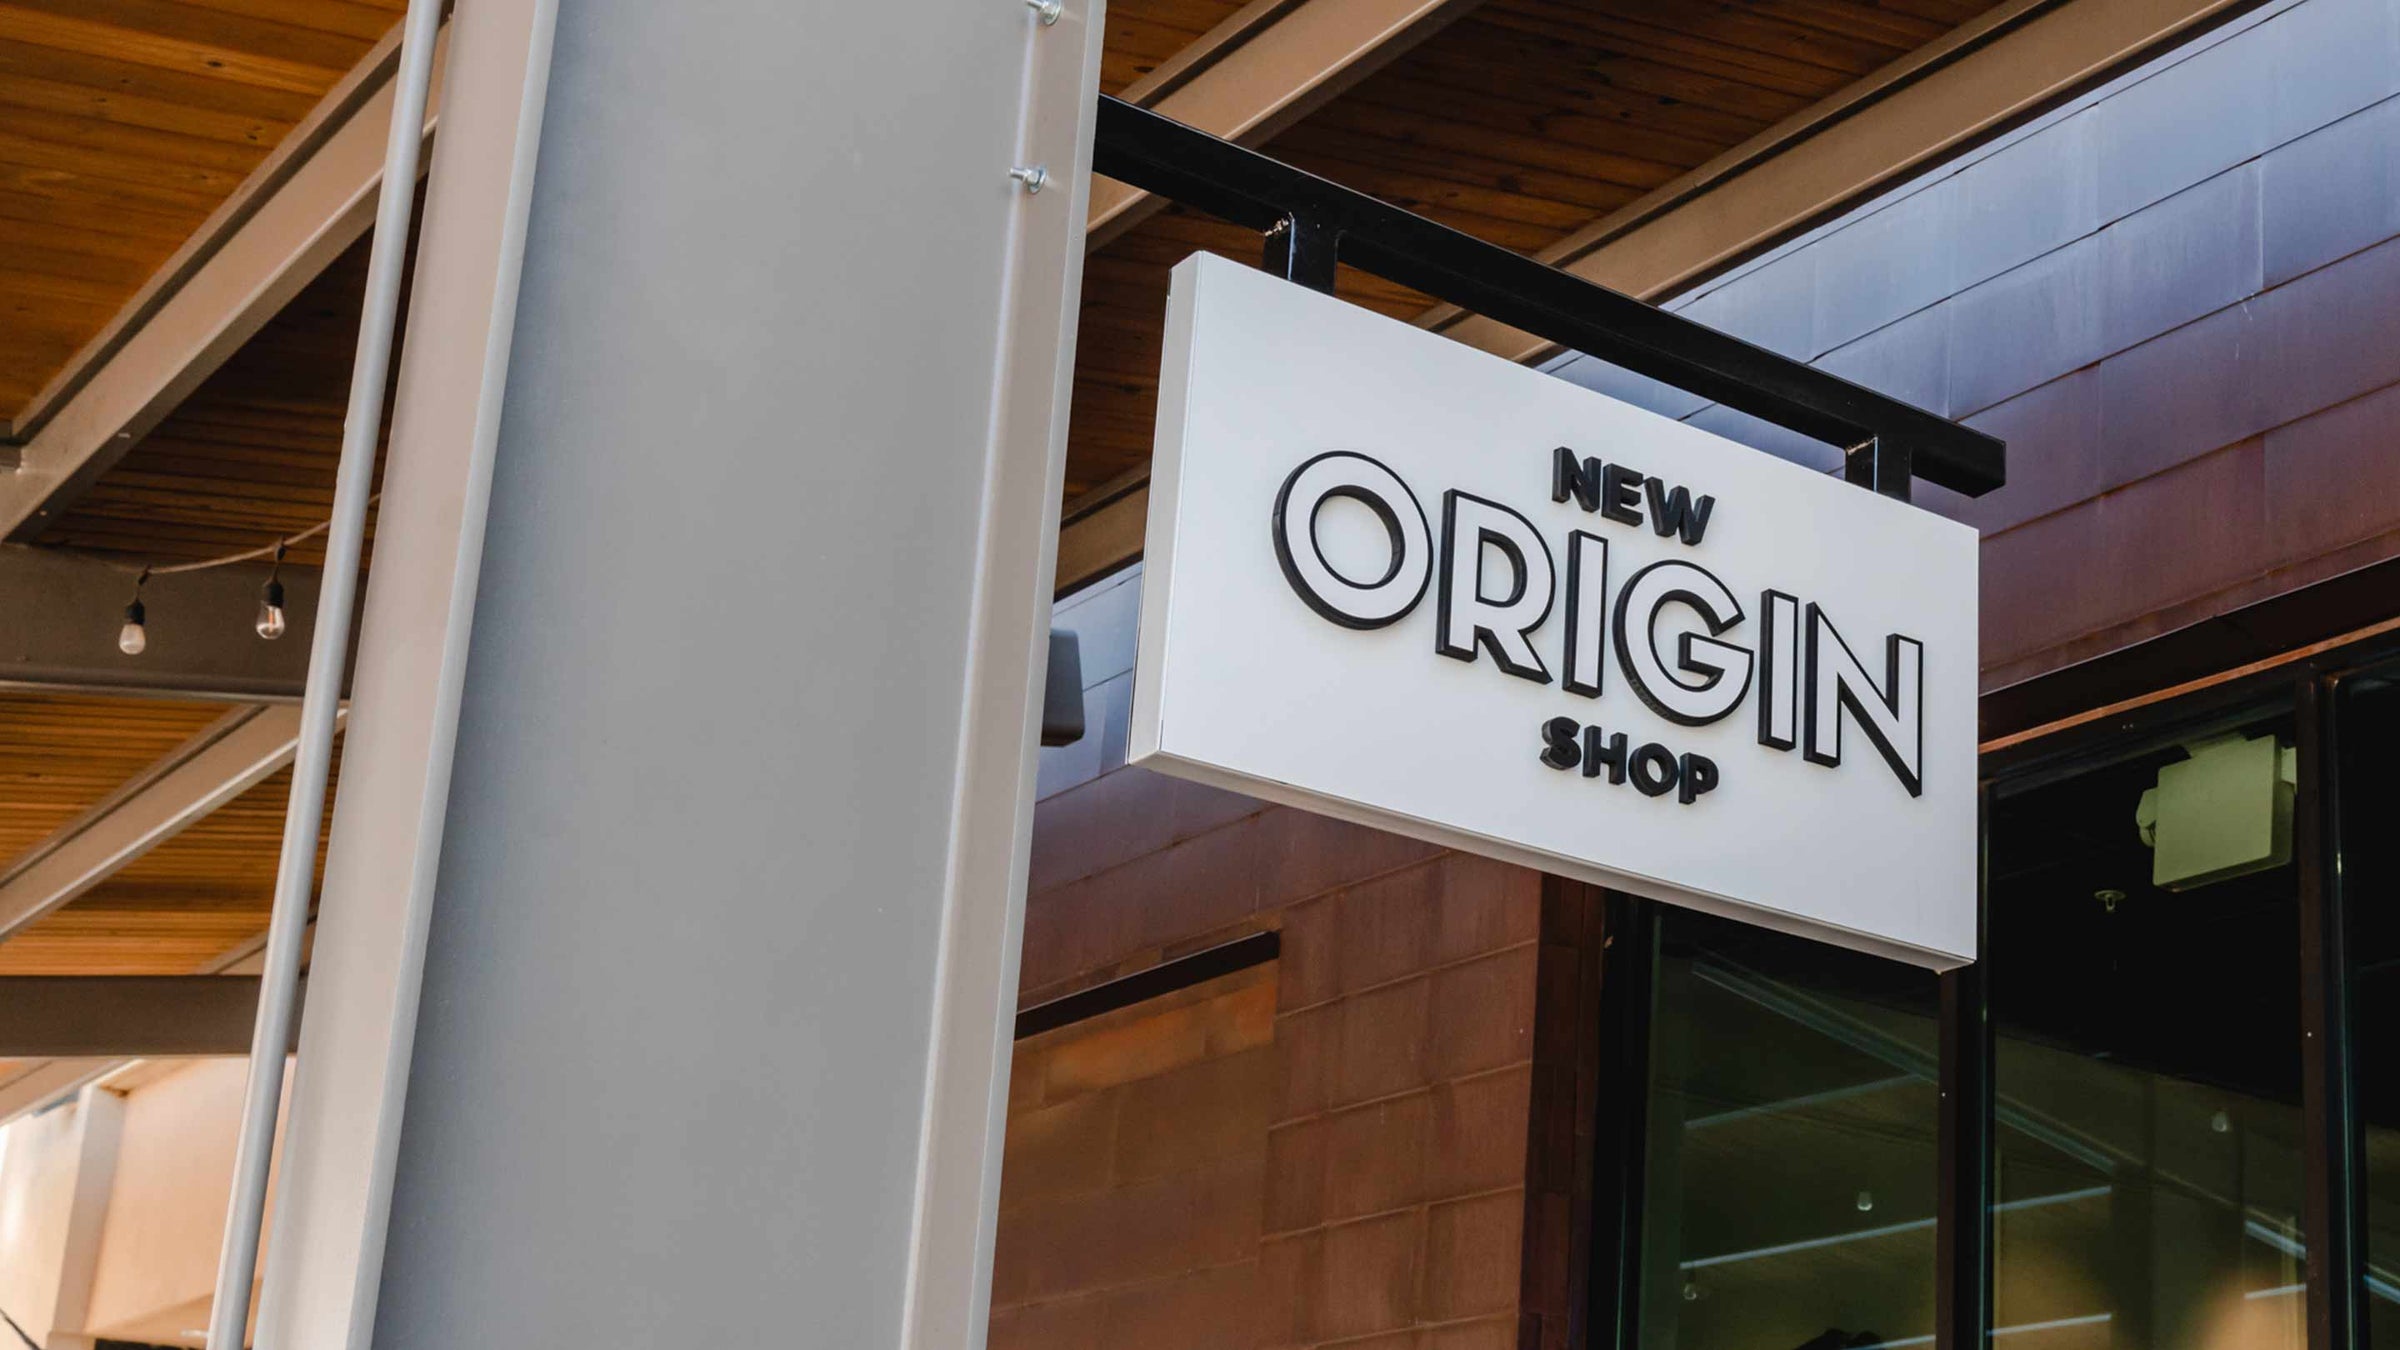 New Origin Shop's Front hanging sign in white